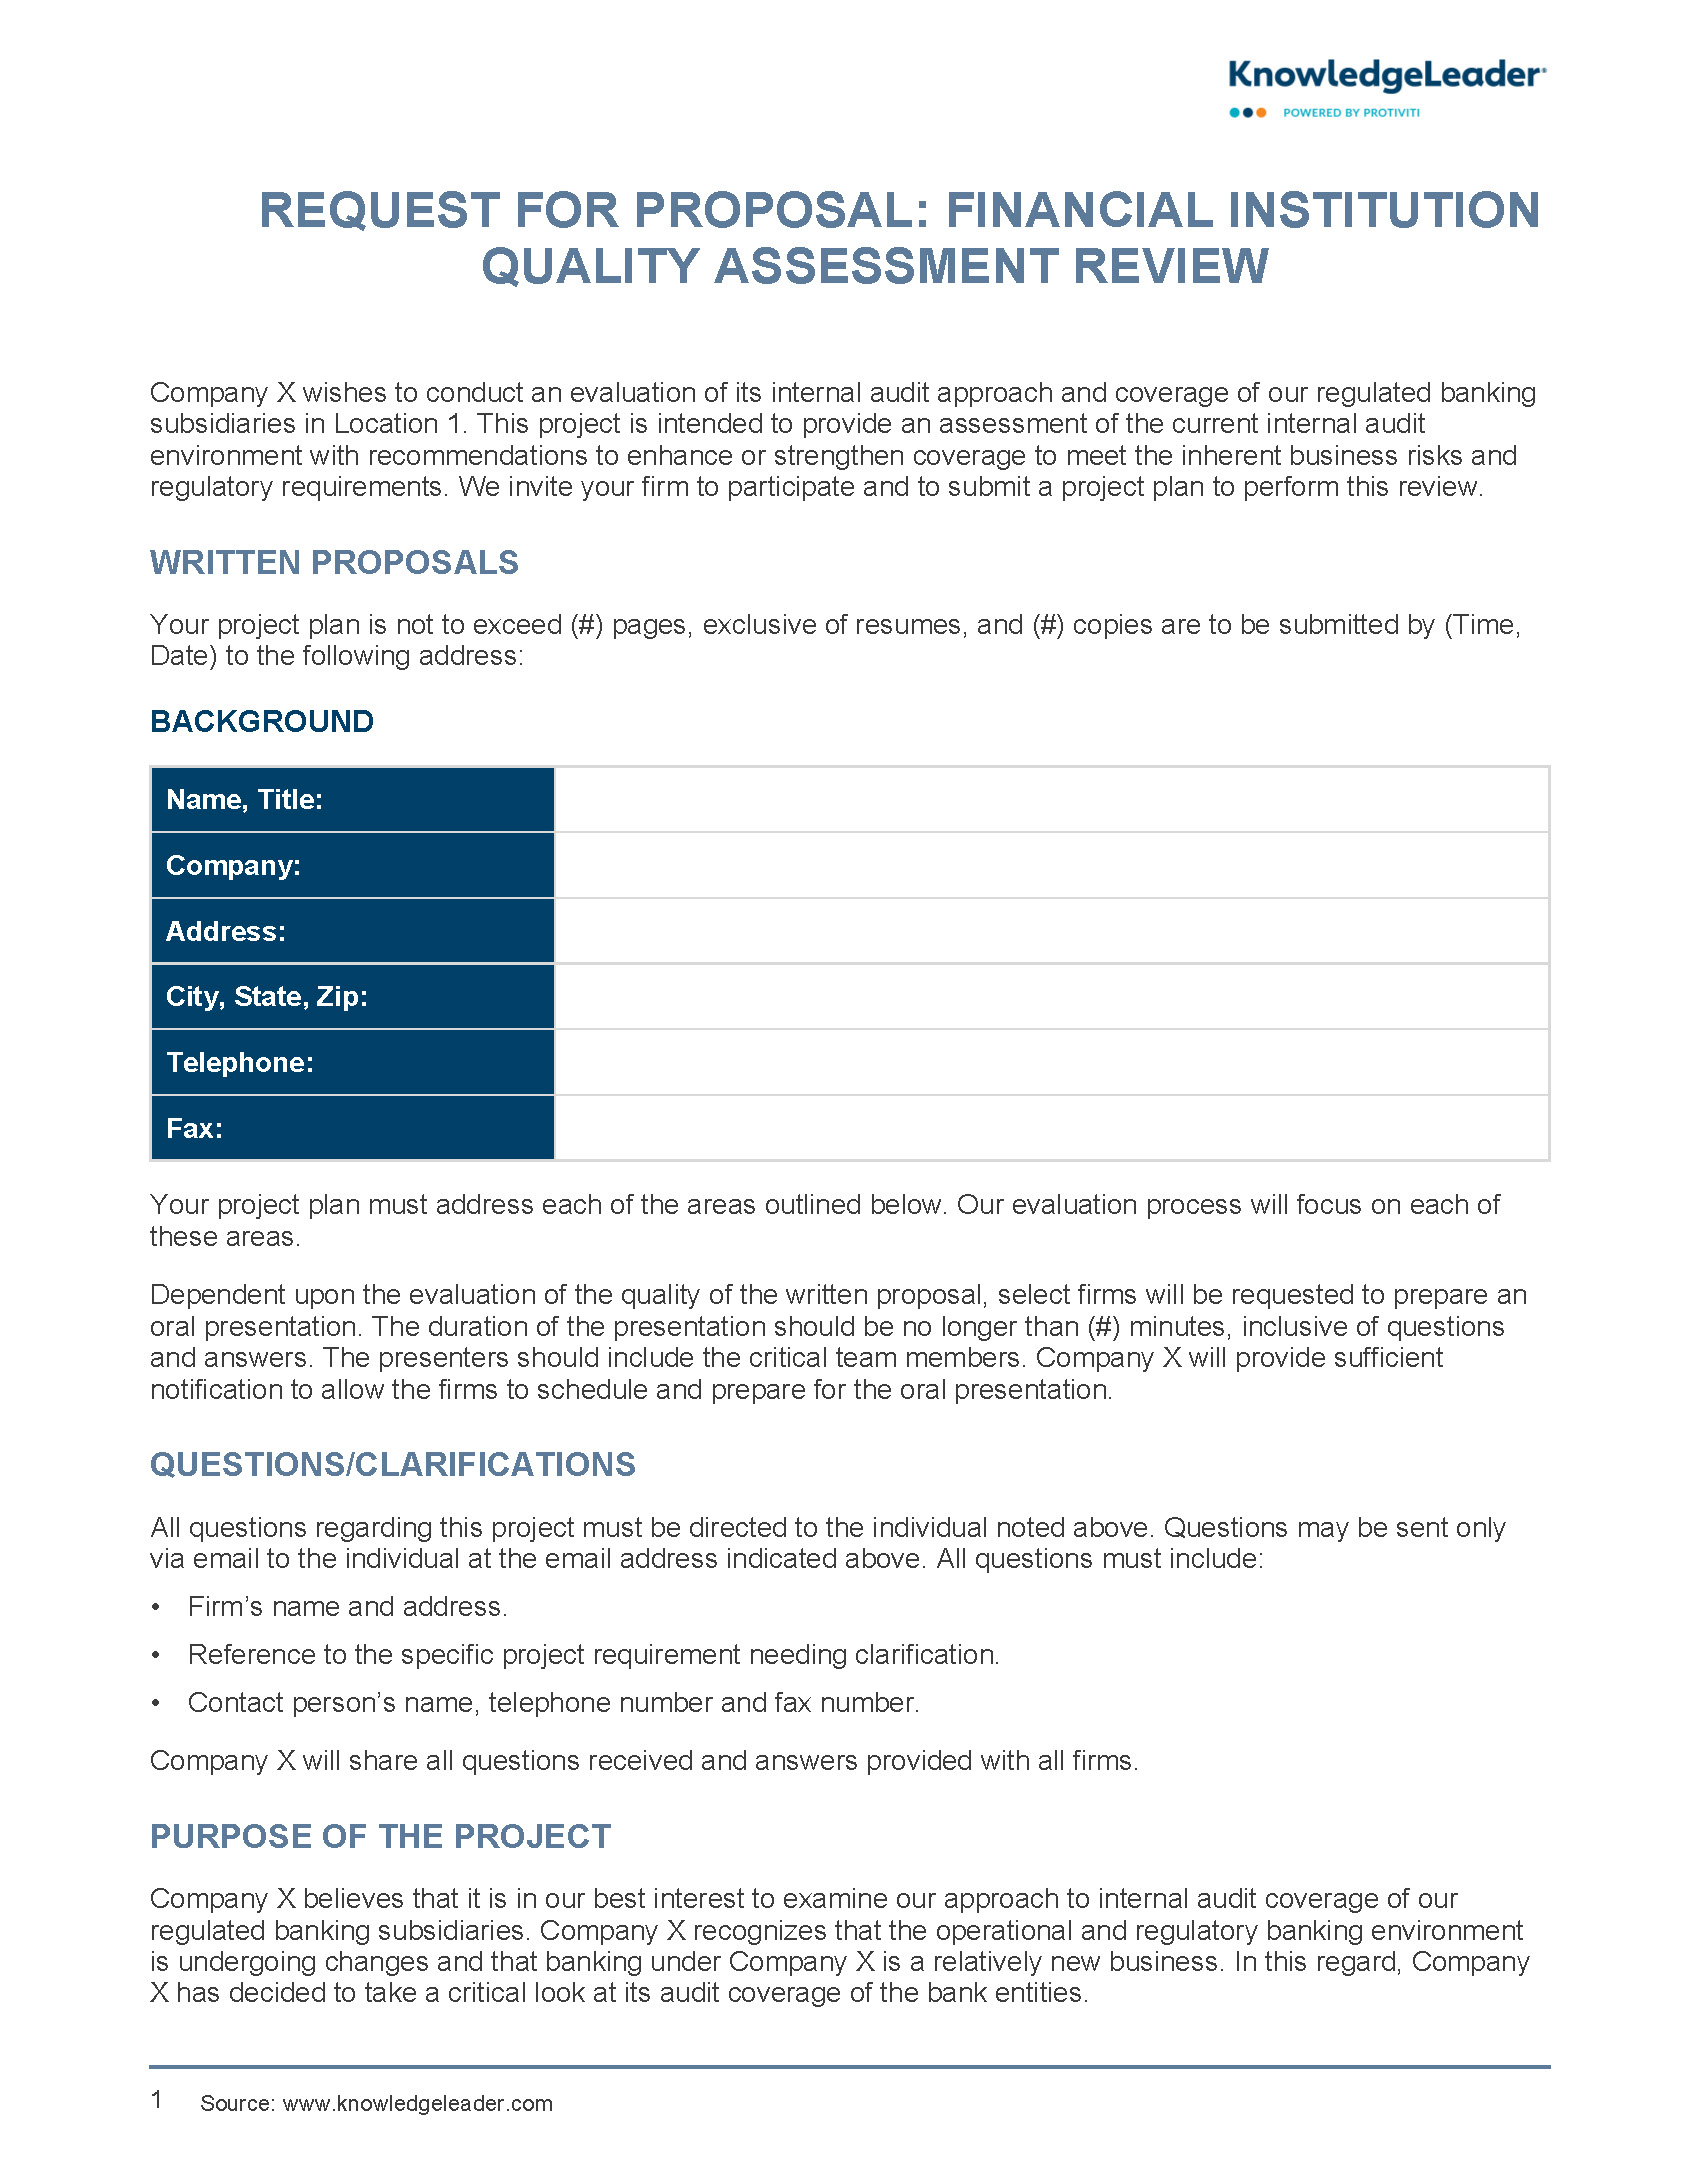 Request for Proposal Financial Institution Quality Assessment Review